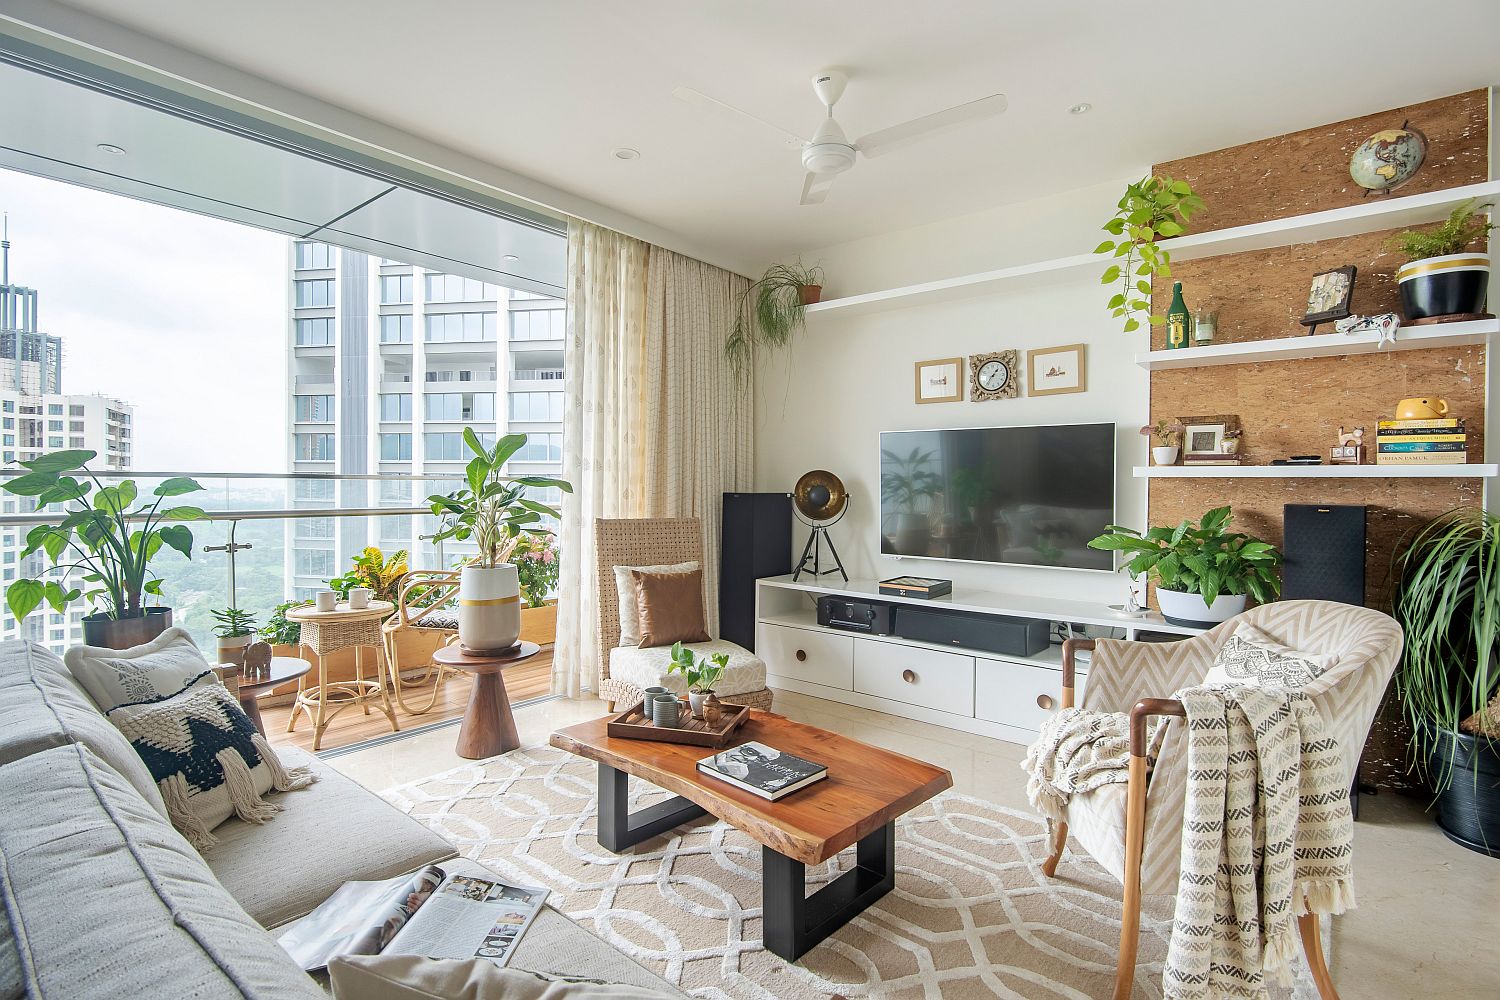 Wood-and-white-apartment-living-room-with-relaxed-tropical-style-and-plenty-of-greenery